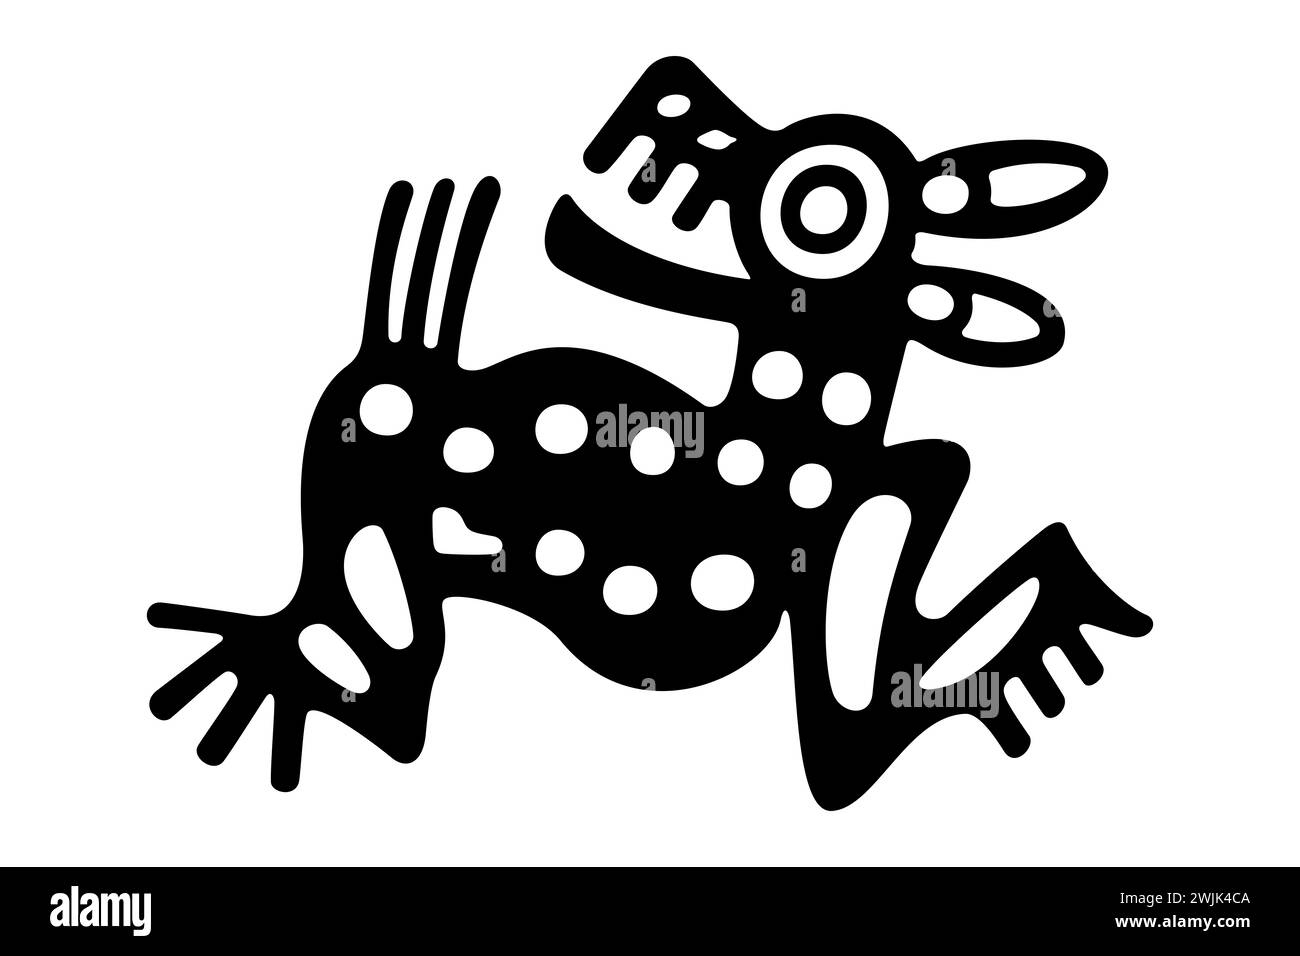 Deer symbol of ancient Mexico. Aztec clay stamp motif showing an Mazatl as it was found in pre-Columbian Veracruz. 7th day sign of the Aztec calendar. Stock Photo